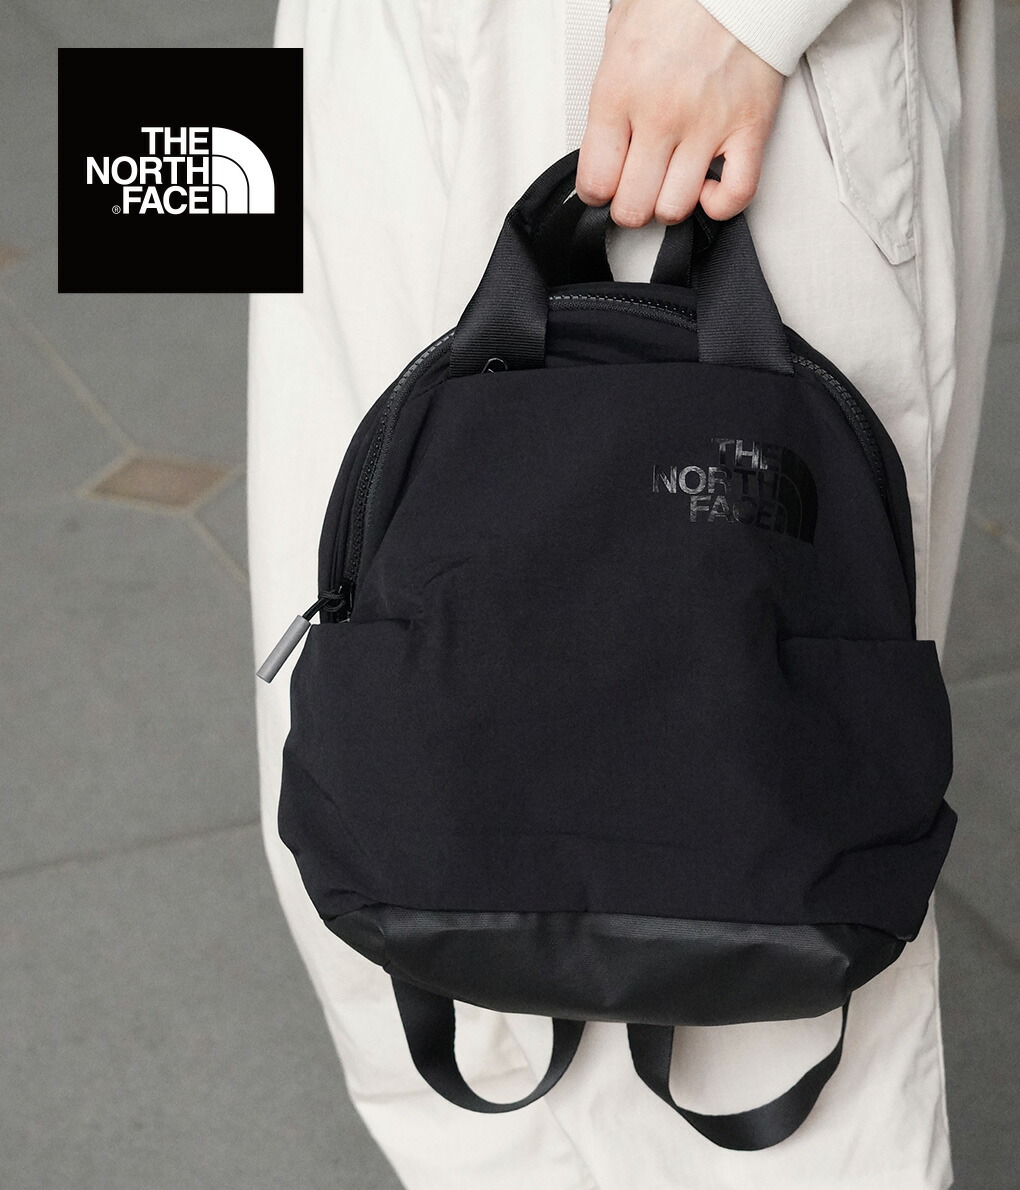 THE NORTH FACE / ザ ノースフェイス ： 【レディース】W Never Stop Mini Backpack ： NMW82301